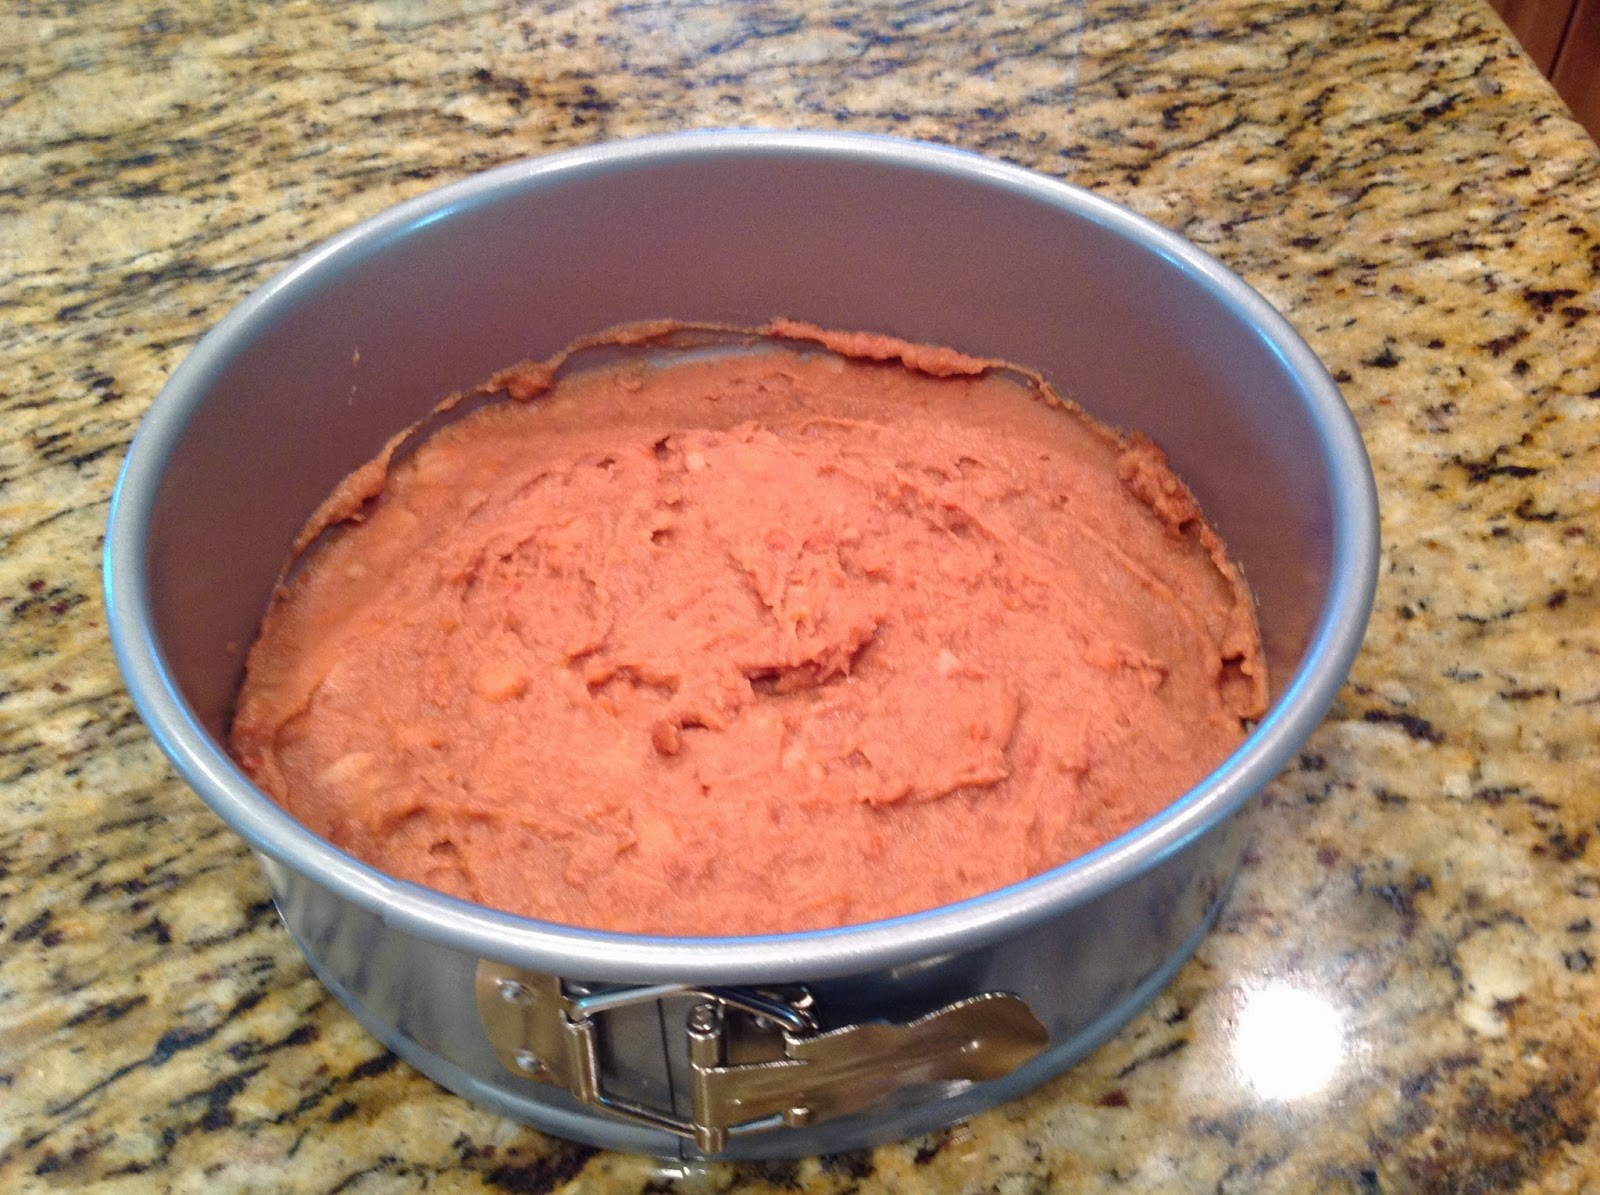 spring form pan with refried beans